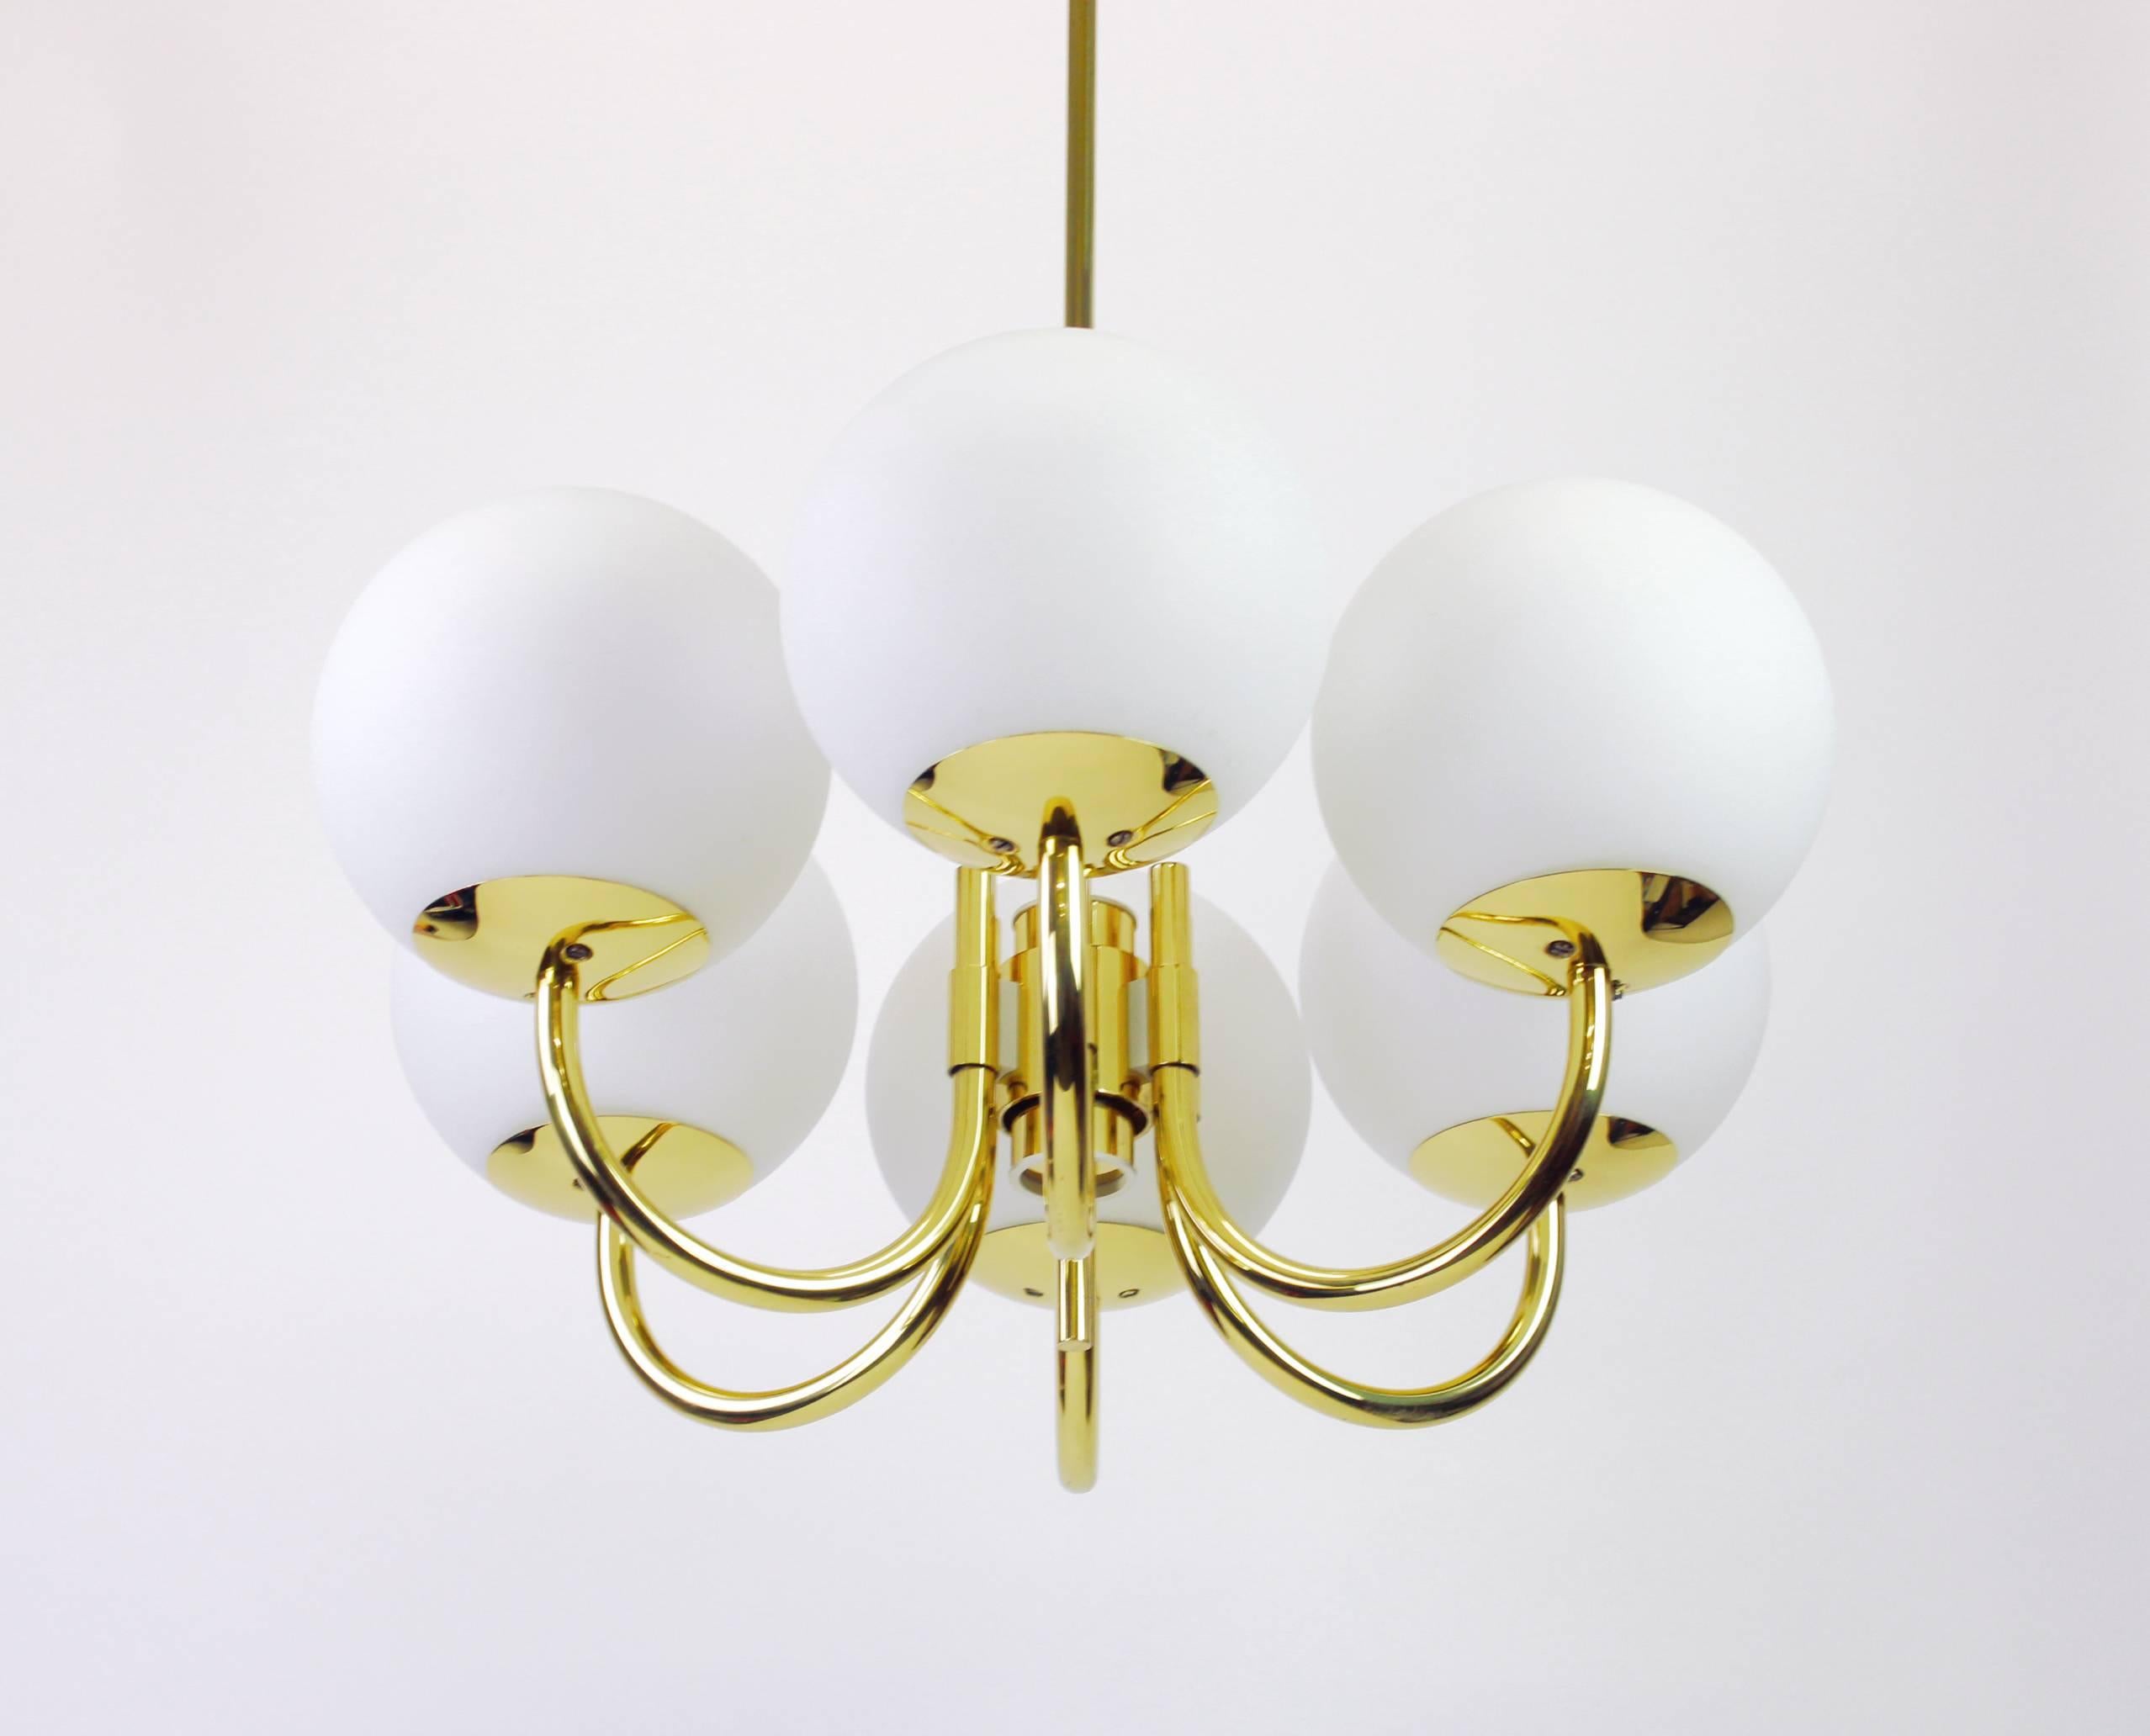 Stunning radial Sputnik chandelier with six opal glass globes by Limburg, Germany, 1970s.

High quality and in very good condition. Cleaned, well-wired and ready to use. 

The fixture requires 6 x E27 Standard bulbs and is compatible with the US/UK/